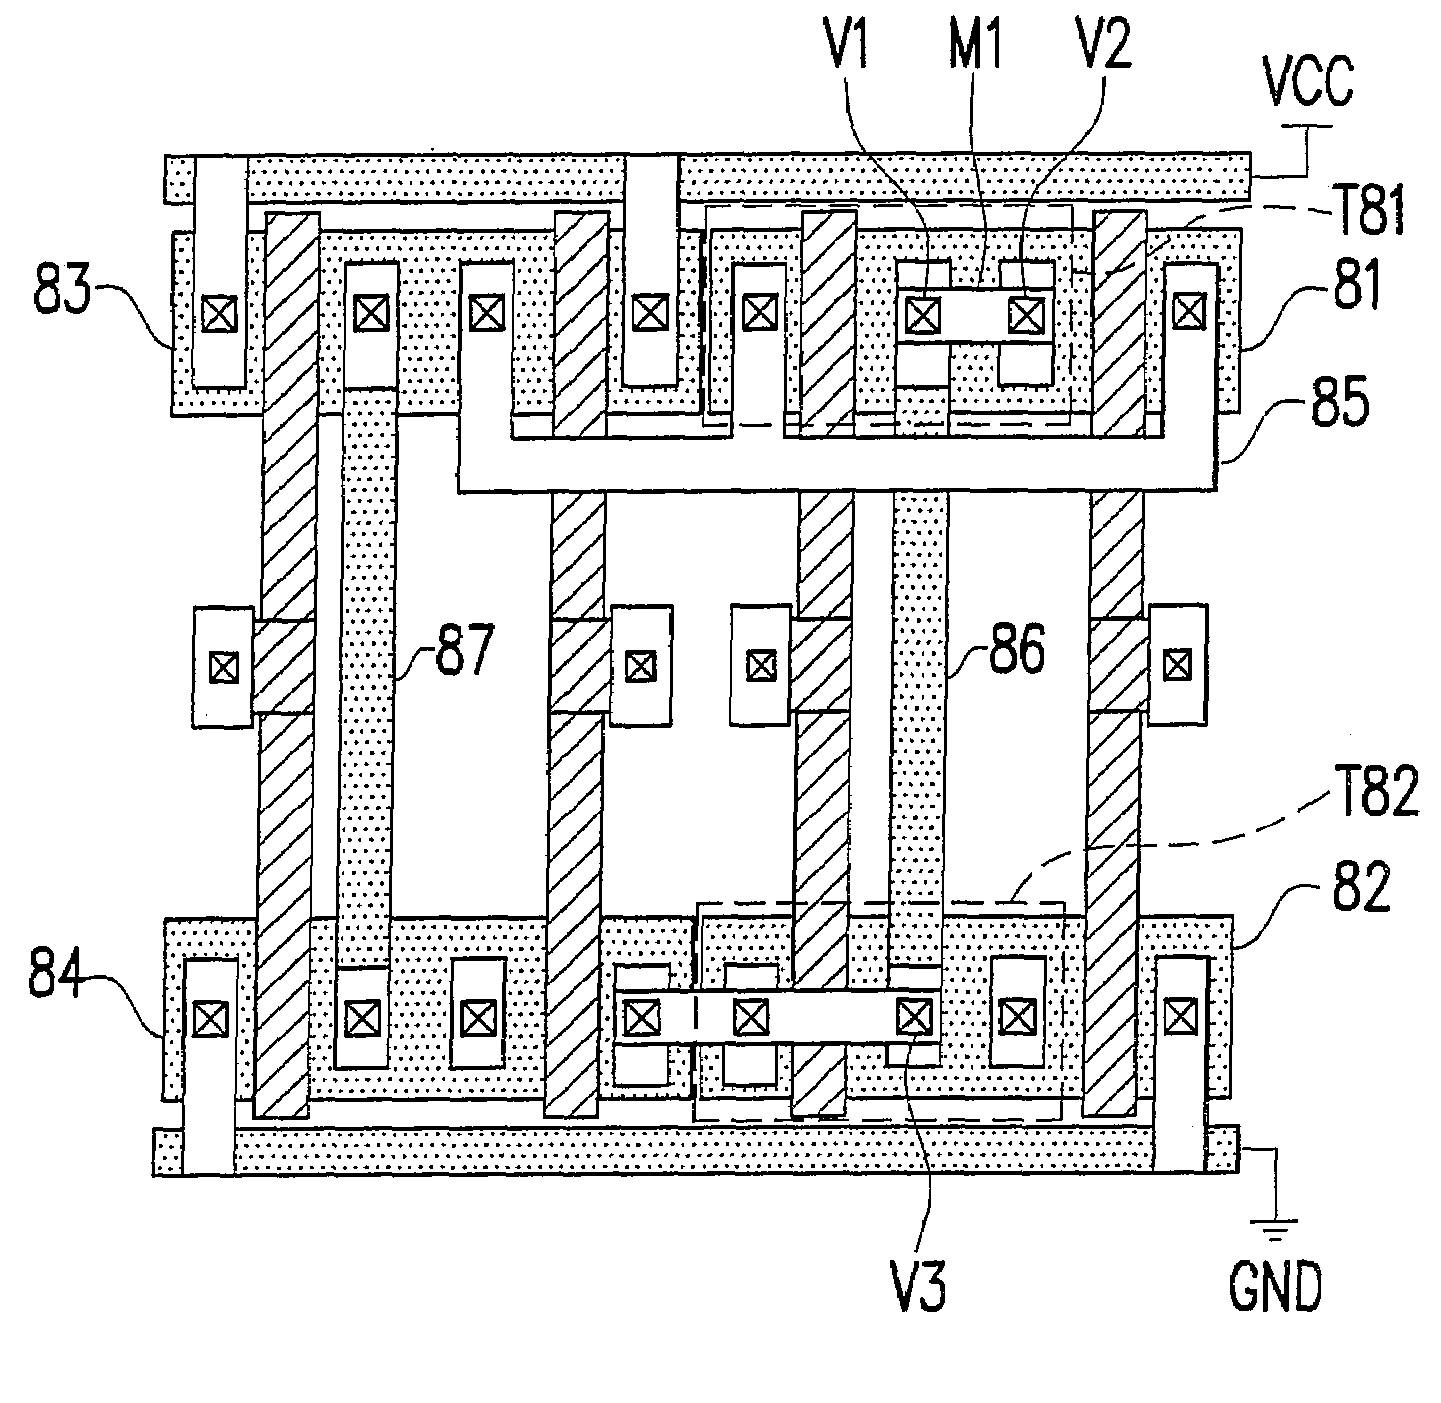 Structured asic layout architecture having tunnel wires